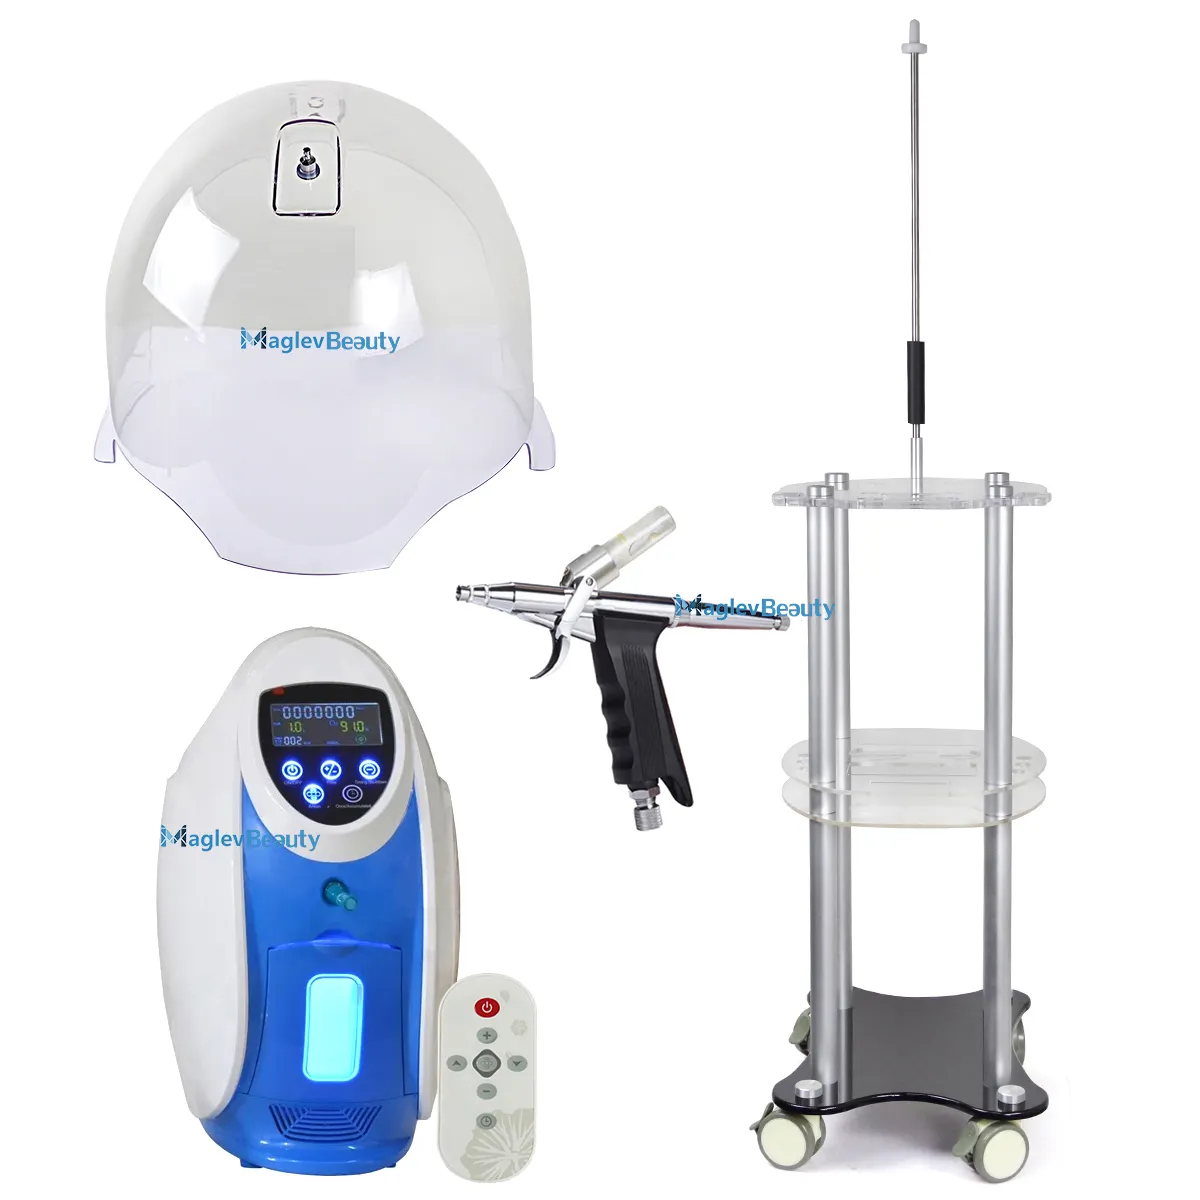 Korea O2toDerm Oxygen Dome Facial Machine Jet Peel Face Oxigen Therapy Mask Dome Whitening Otoderm Oxygen Jet Spray O2toDerm